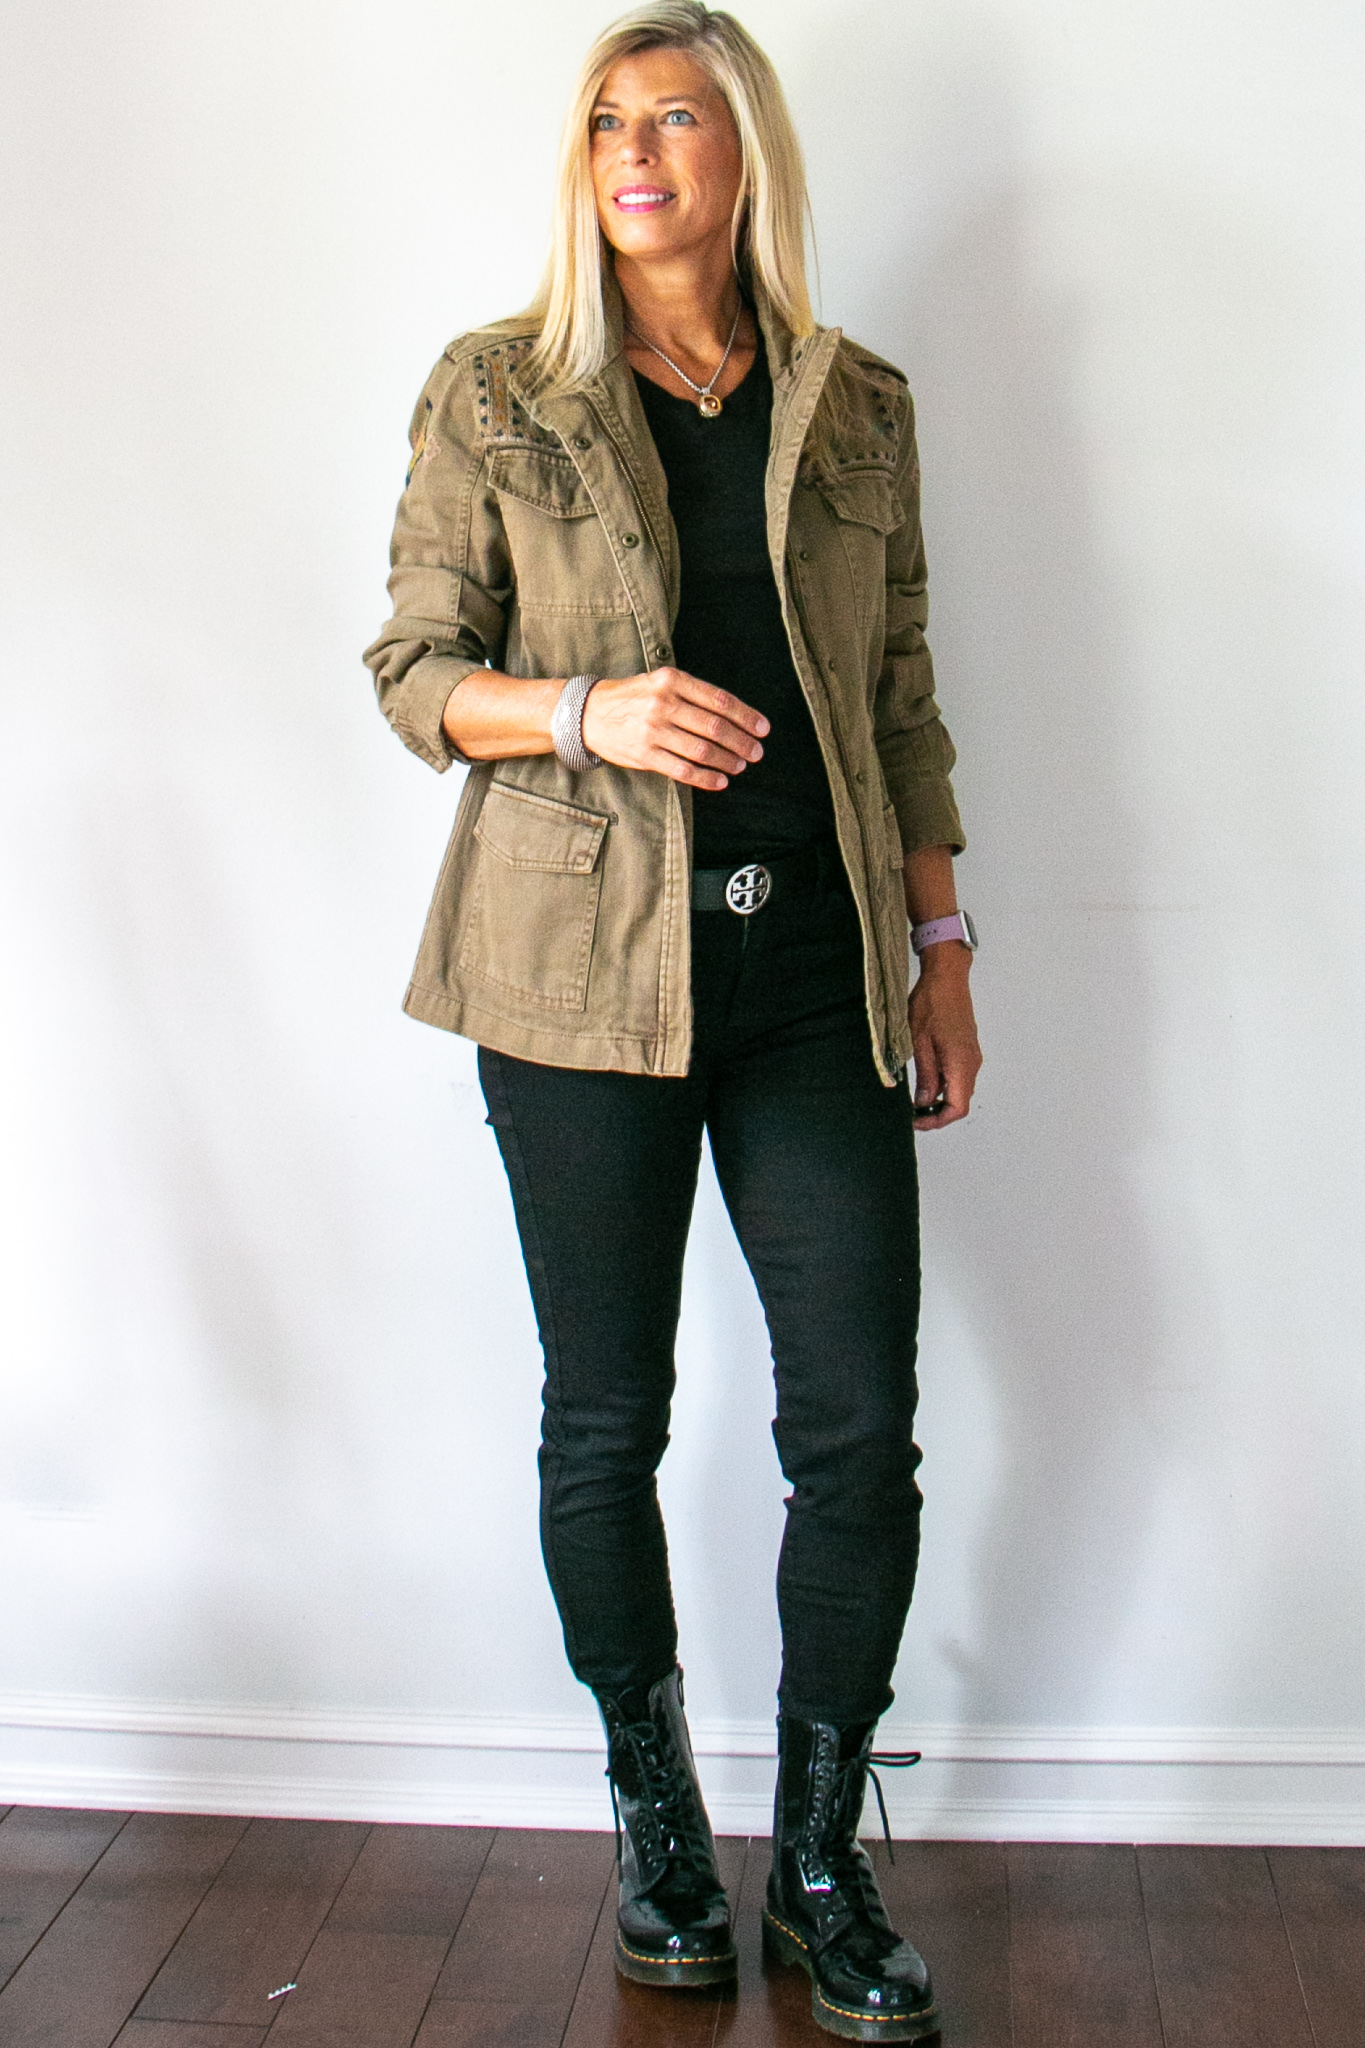 Utility jacket skinny jeans with ankle boots